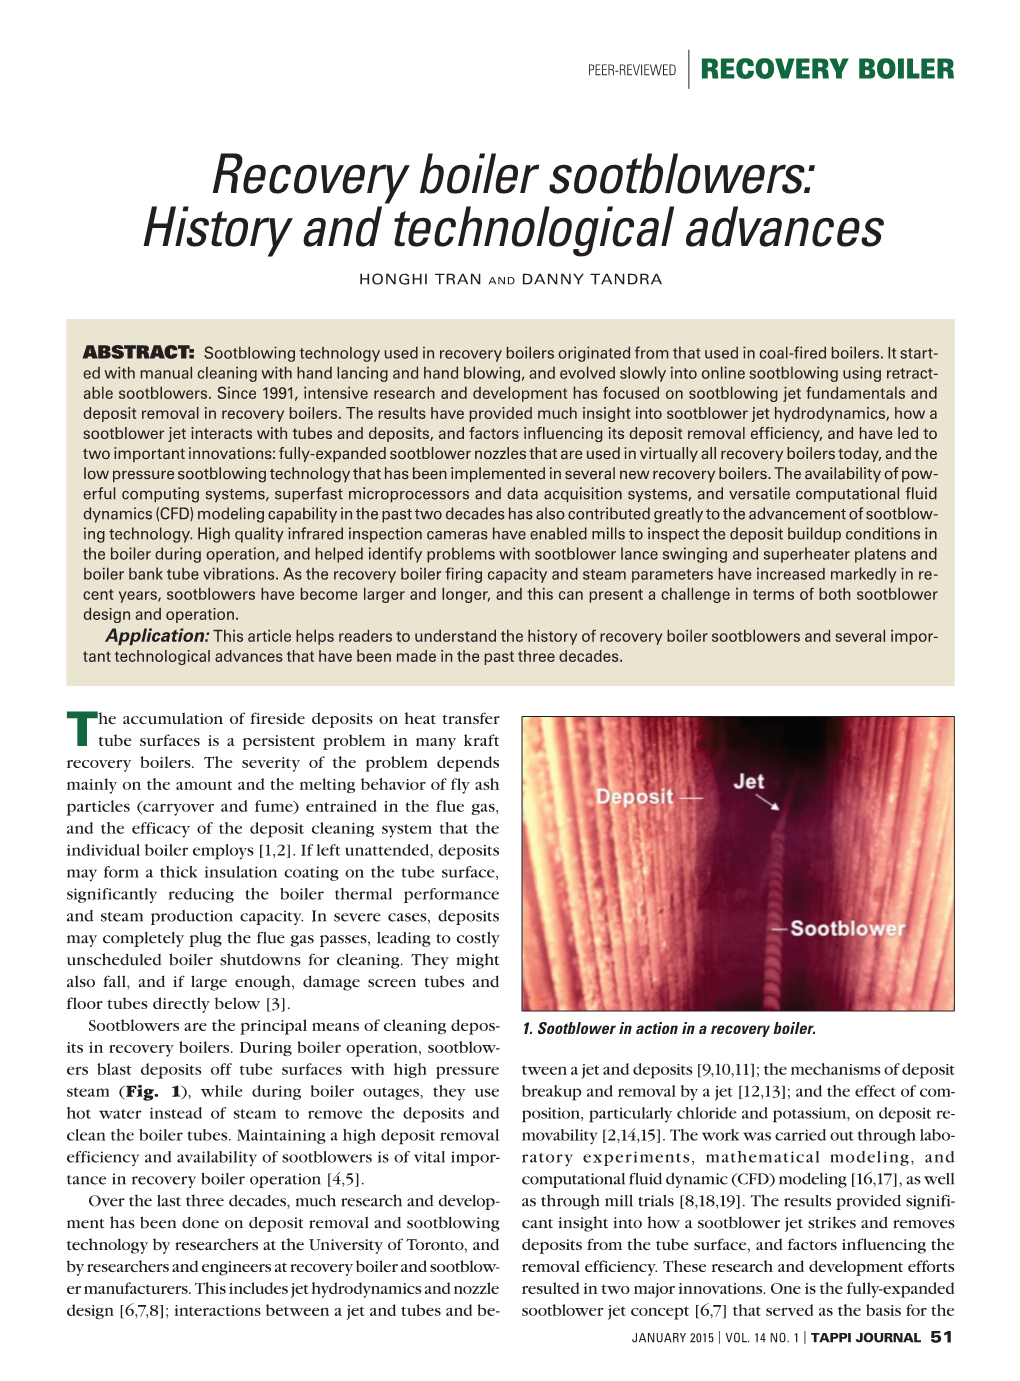 Recovery Boiler Sootblowers: History and Technological Advances